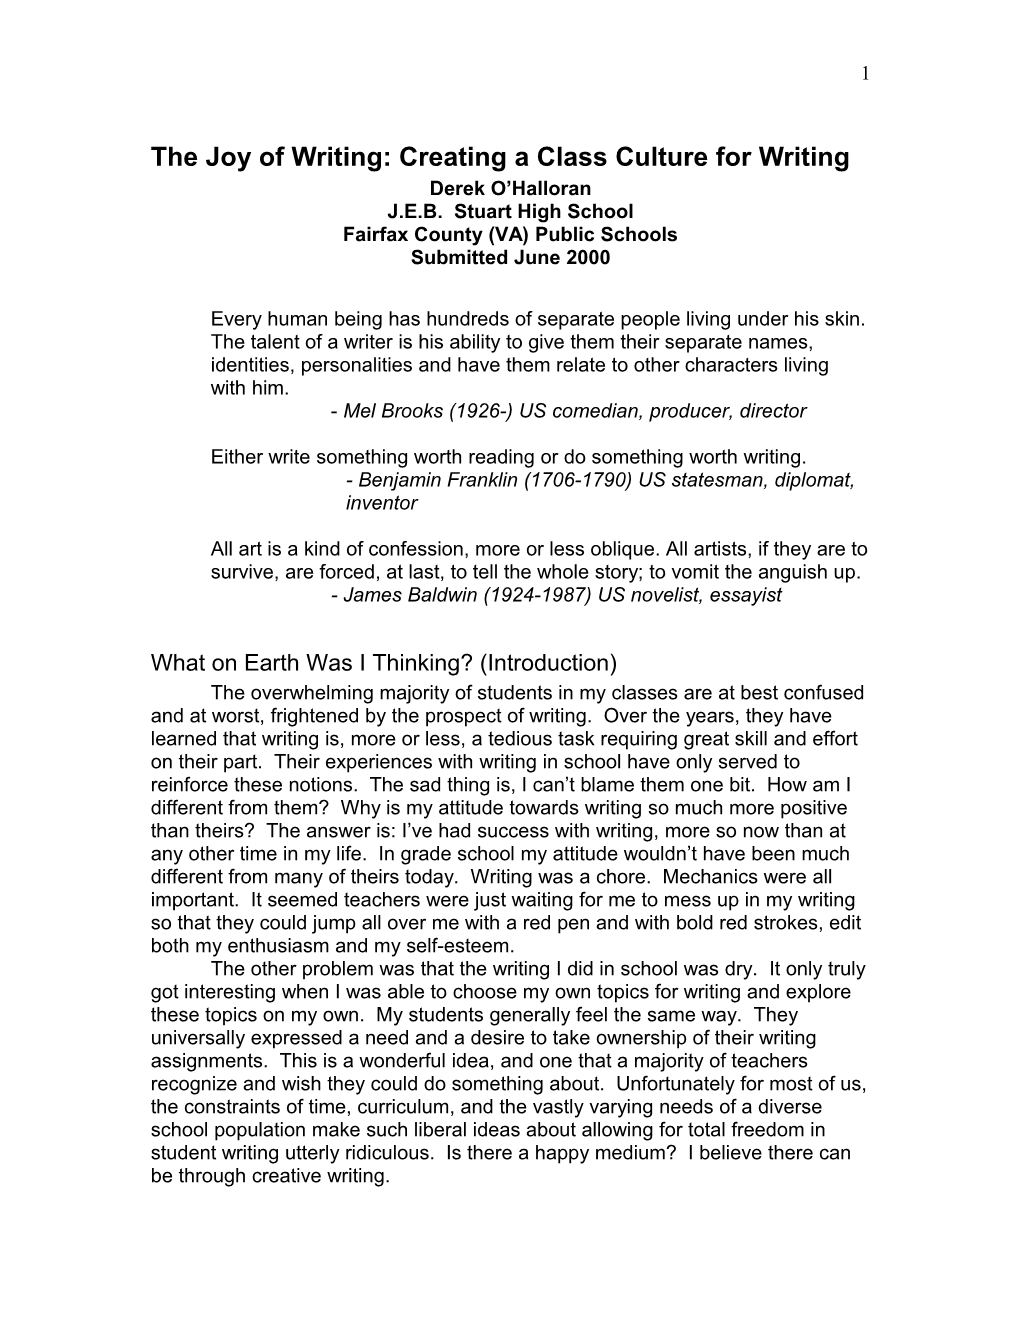 The Joy of Writing: Creating a Class Culture for Writing